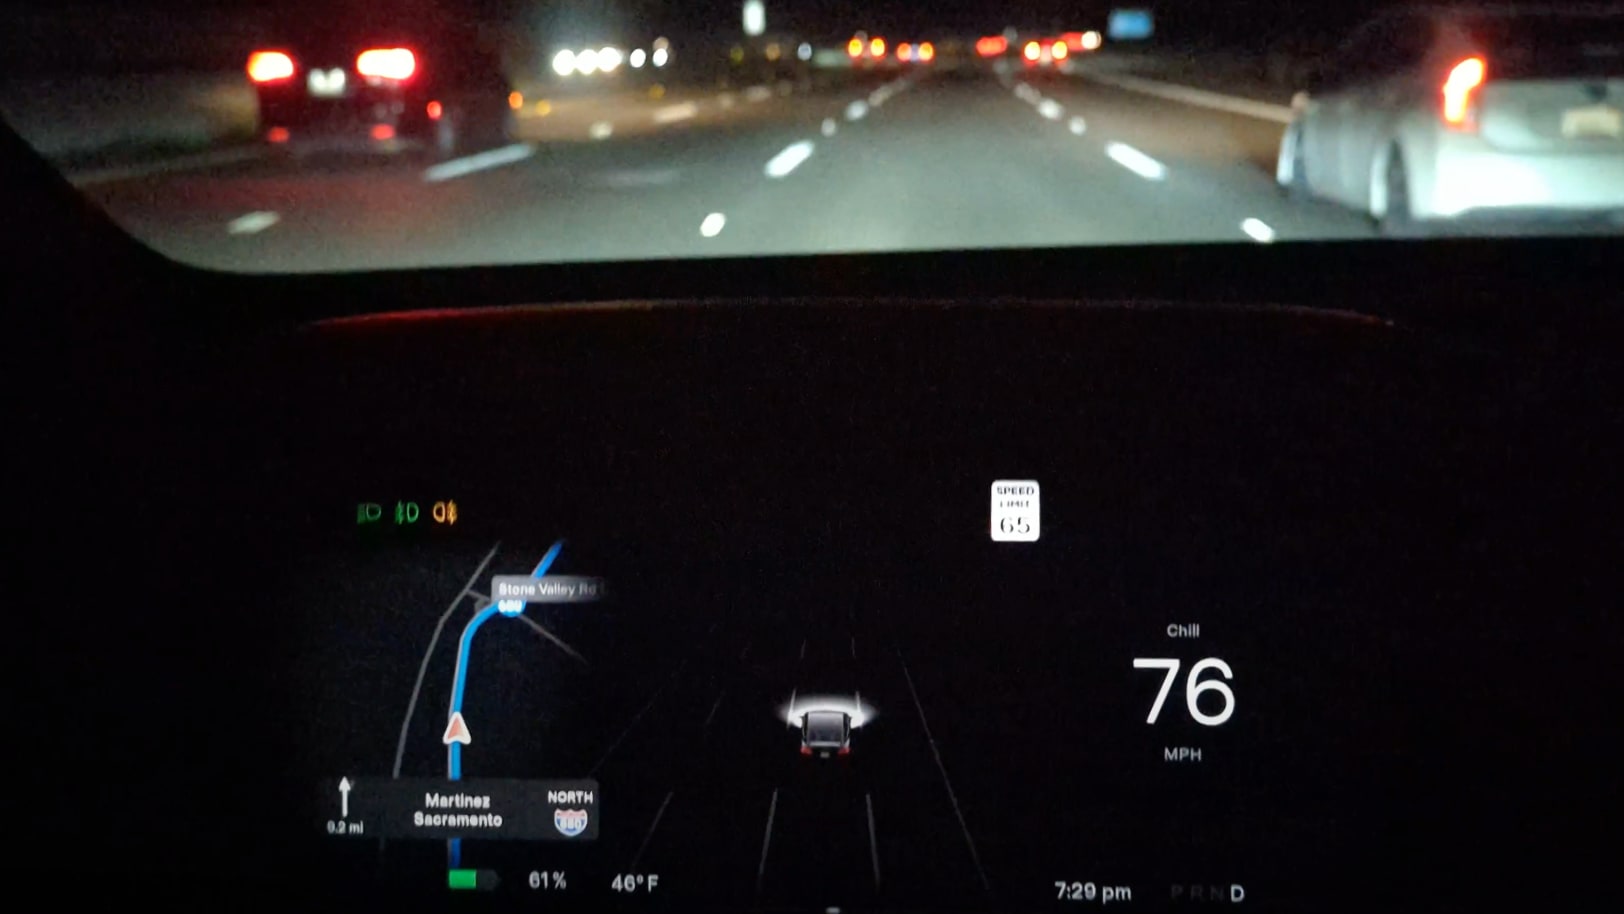 Teslas with hardware 4.0 are missing visualizations, TACC and Autopilot right now